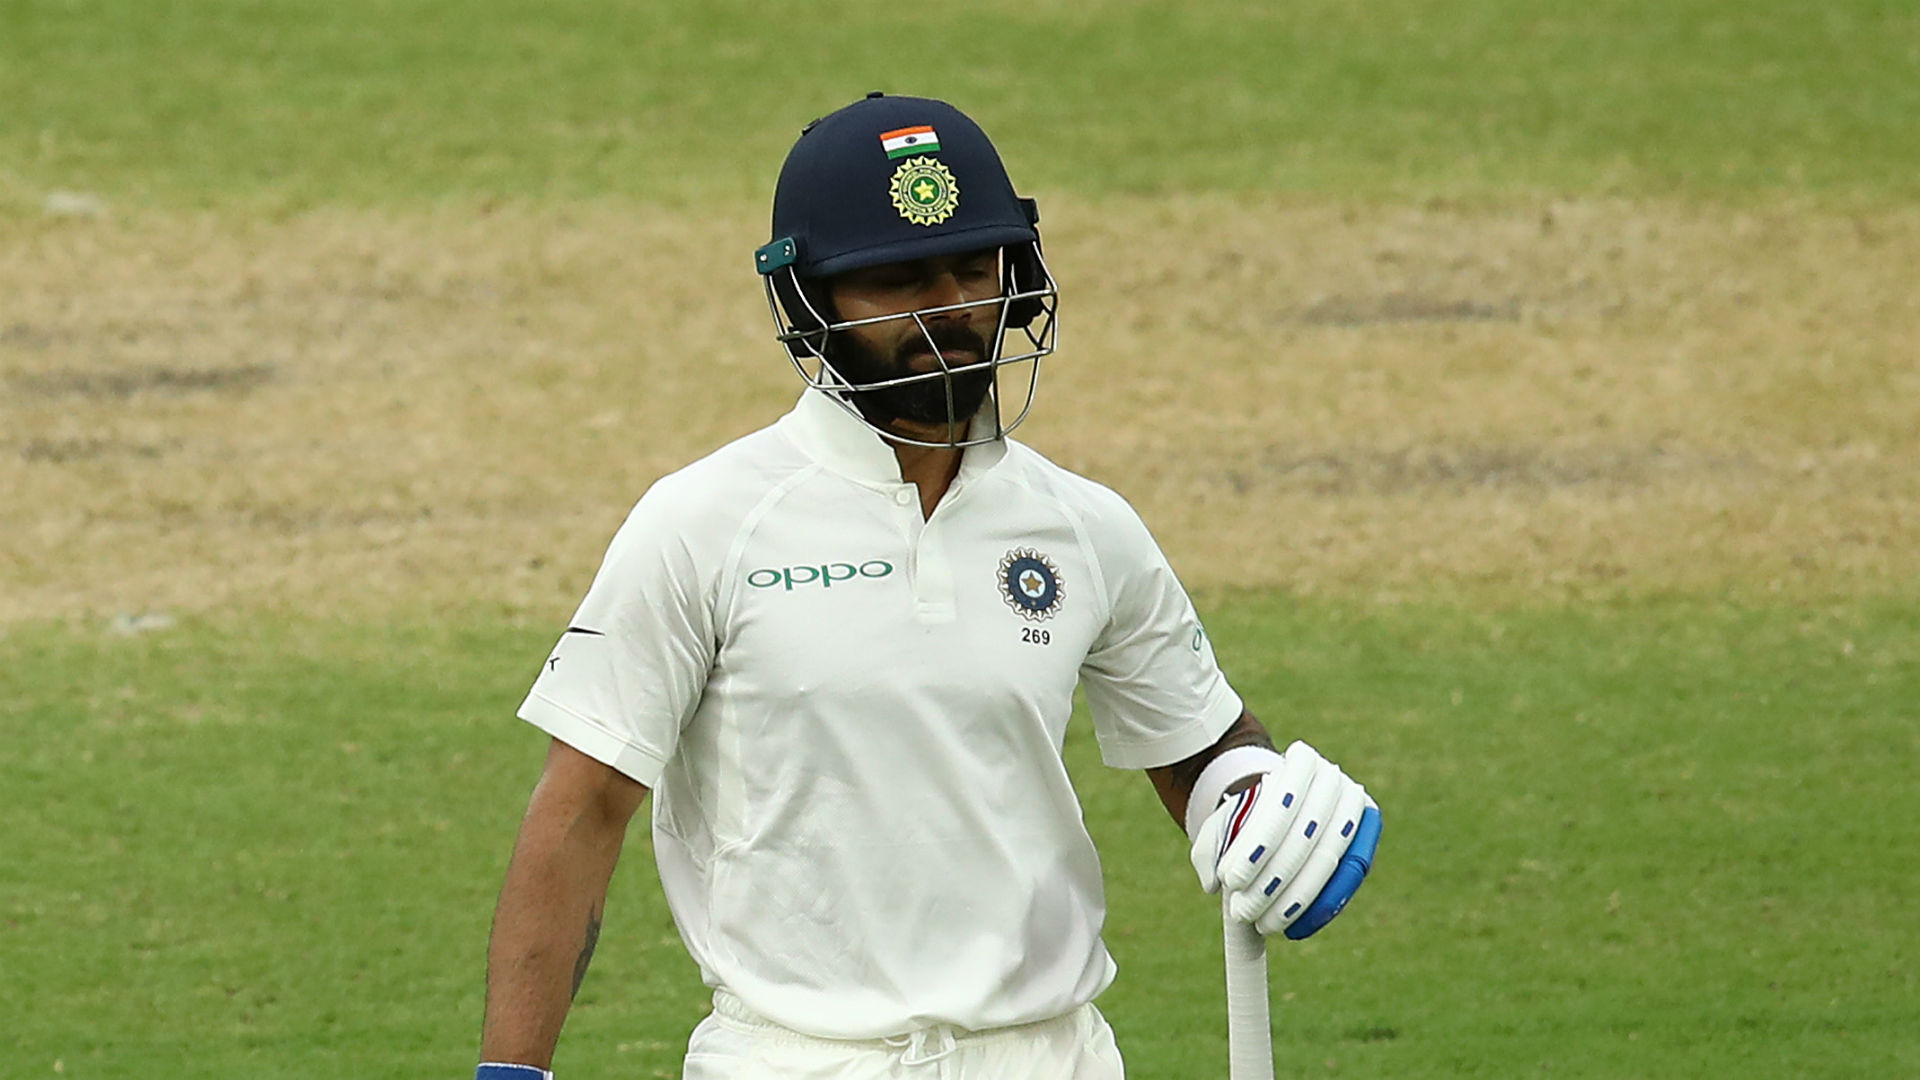 Ricky Ponting and Travis Head were not impressed by the reaction of some Australia supporters to India captain Virat Kohli.